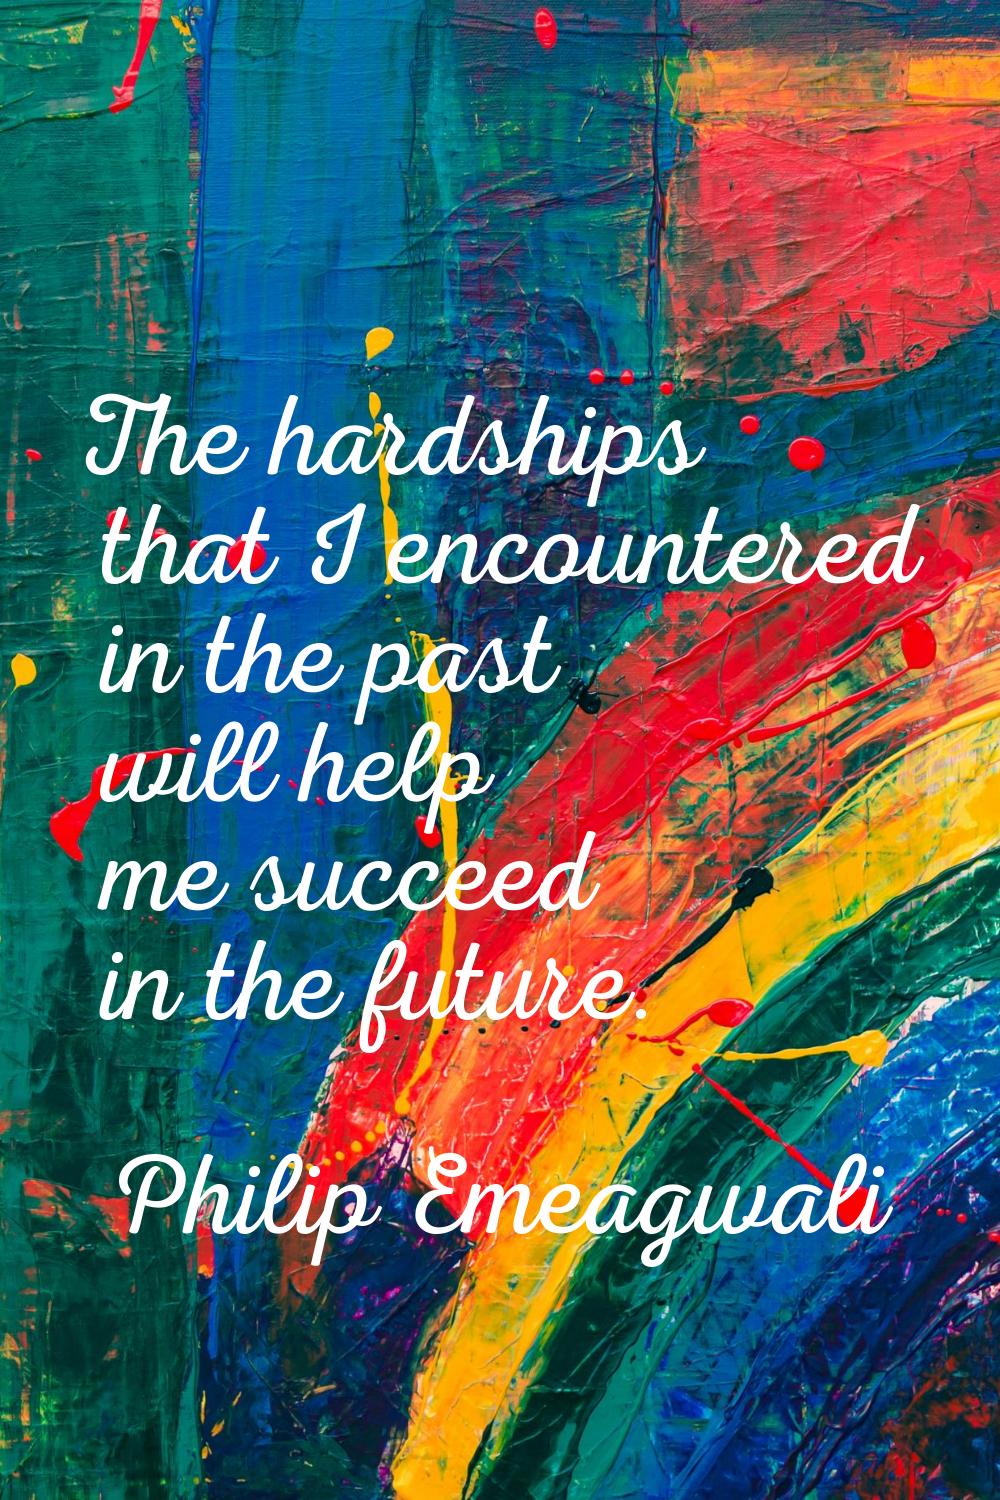 The hardships that I encountered in the past will help me succeed in the future.